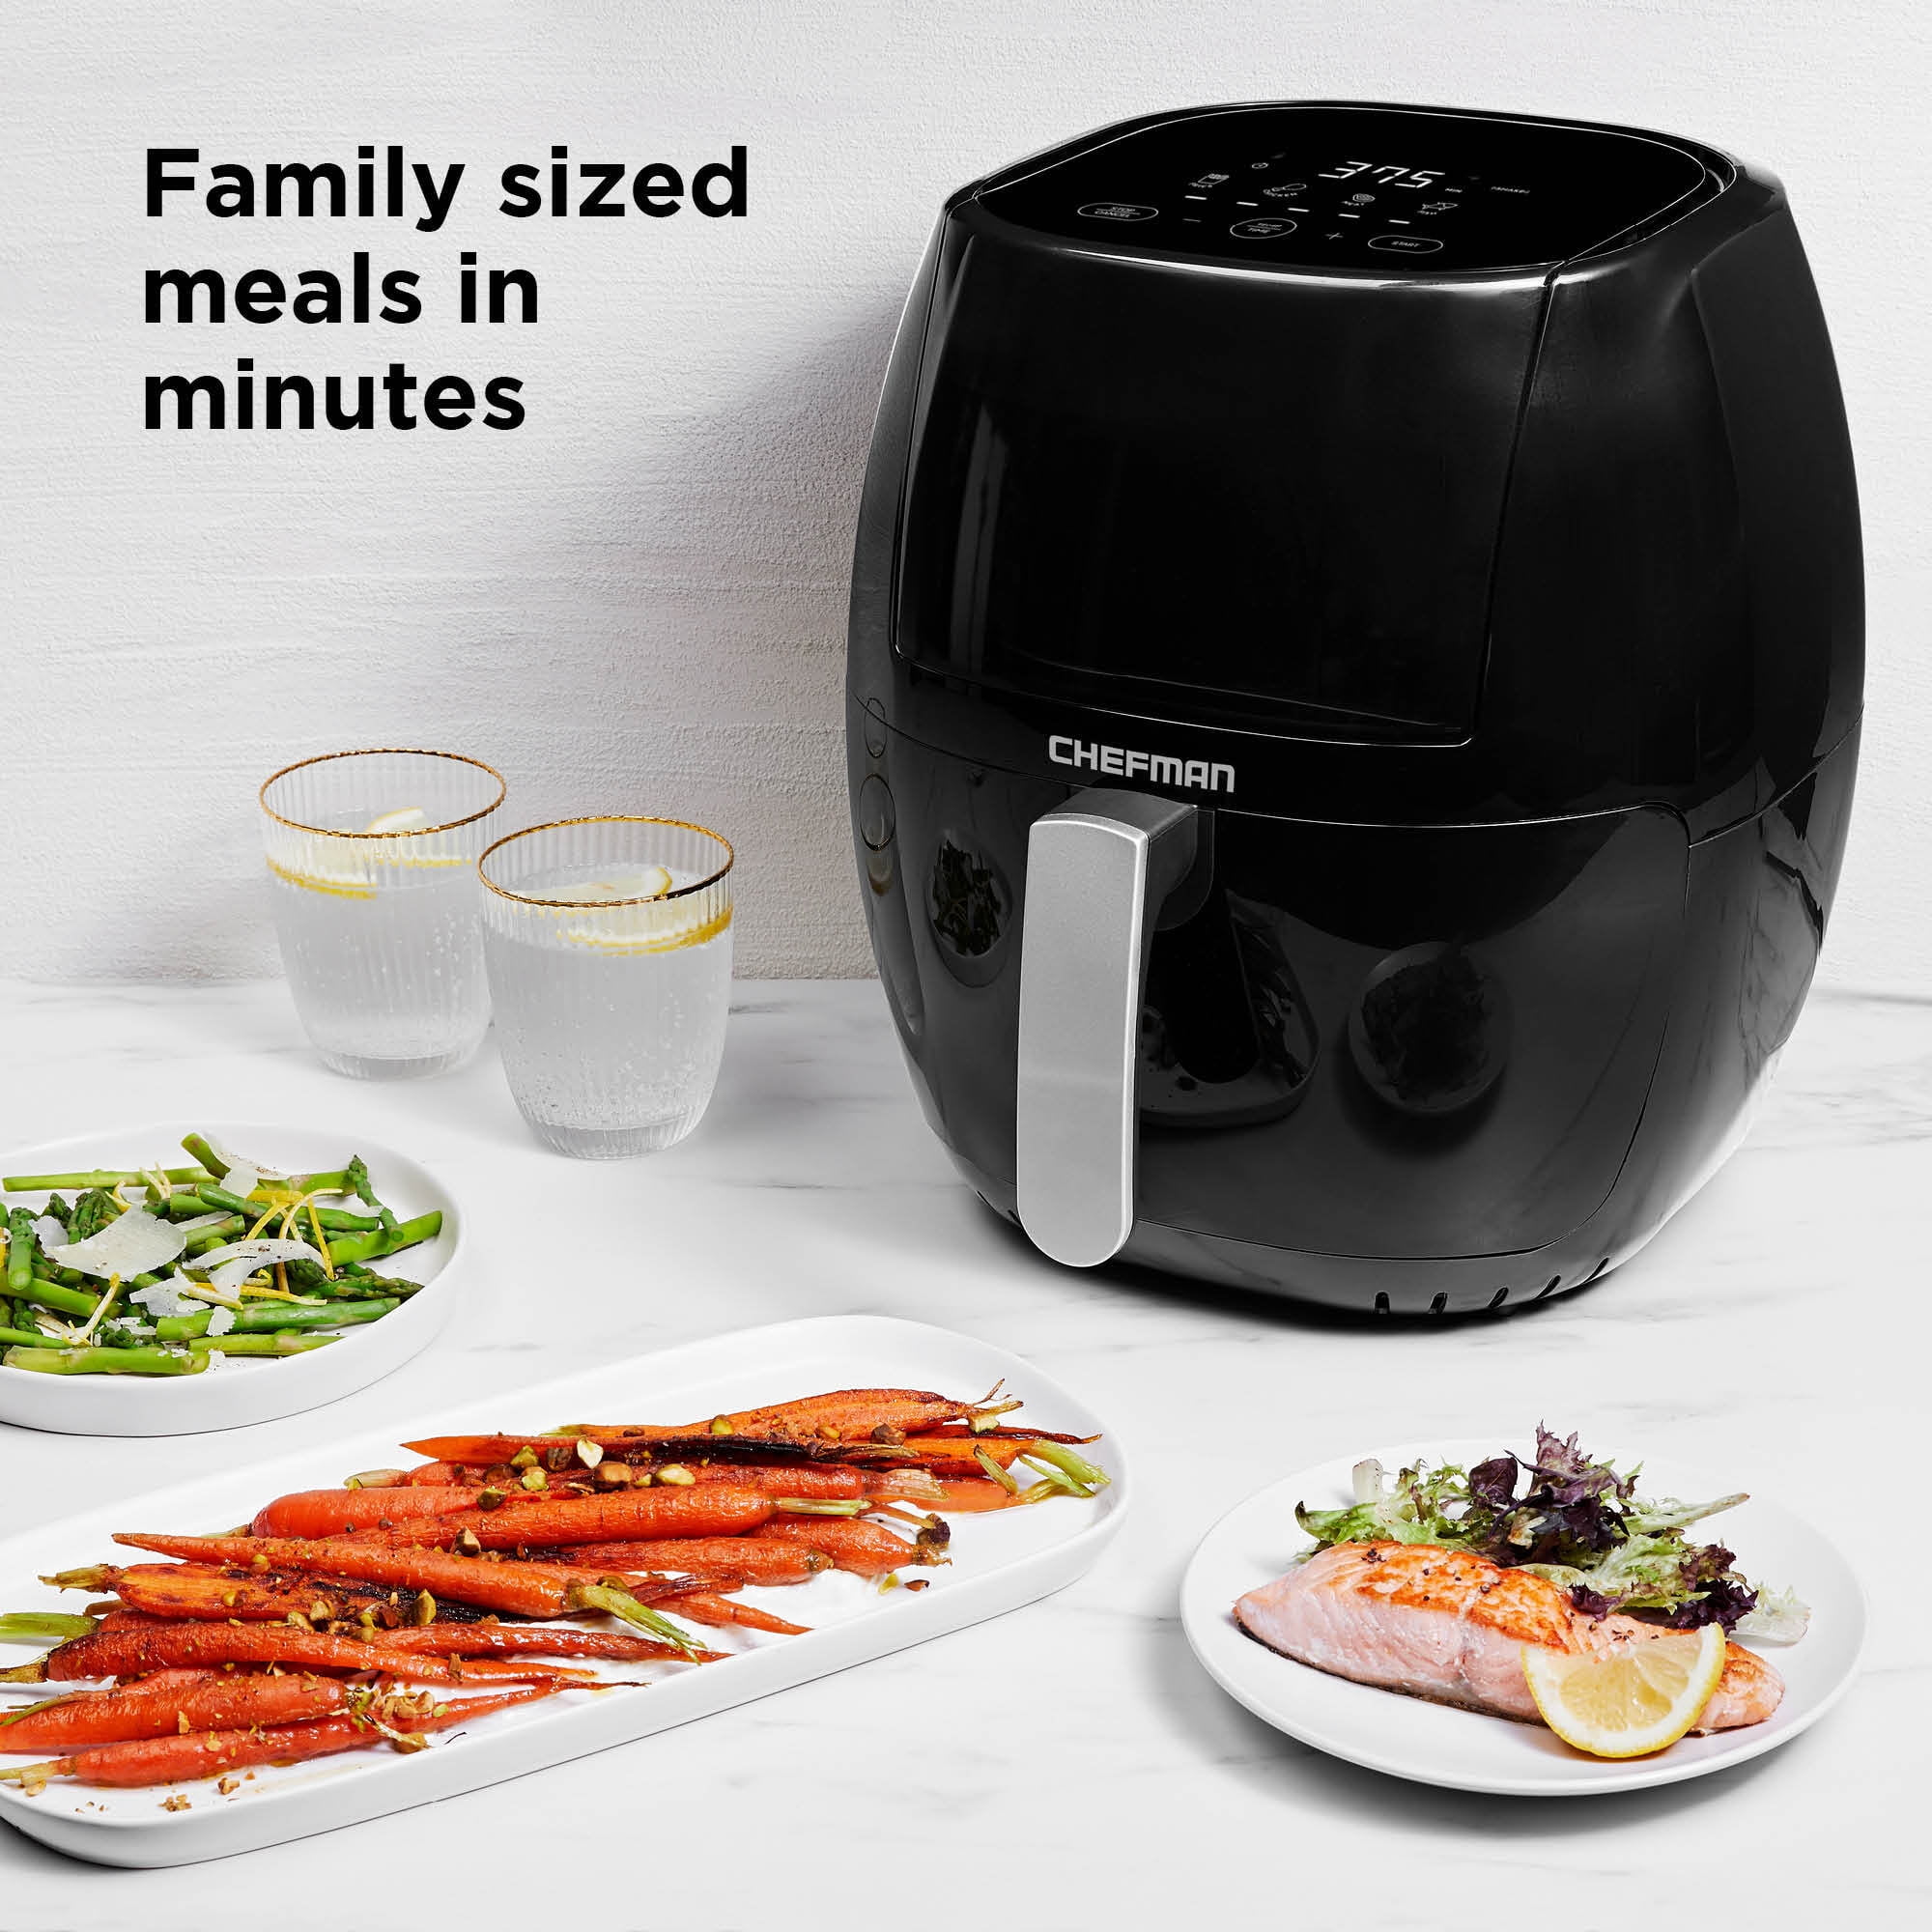  CHEFMAN 2 in 1 Max XL 8 Qt Air Fryer, Healthy Cooking, User  Friendly, Basket Divider For Dual Cooking, Nonstick Stainless Steel,  Digital Touch Screen with 4 Cooking Functions, BPA-Free 